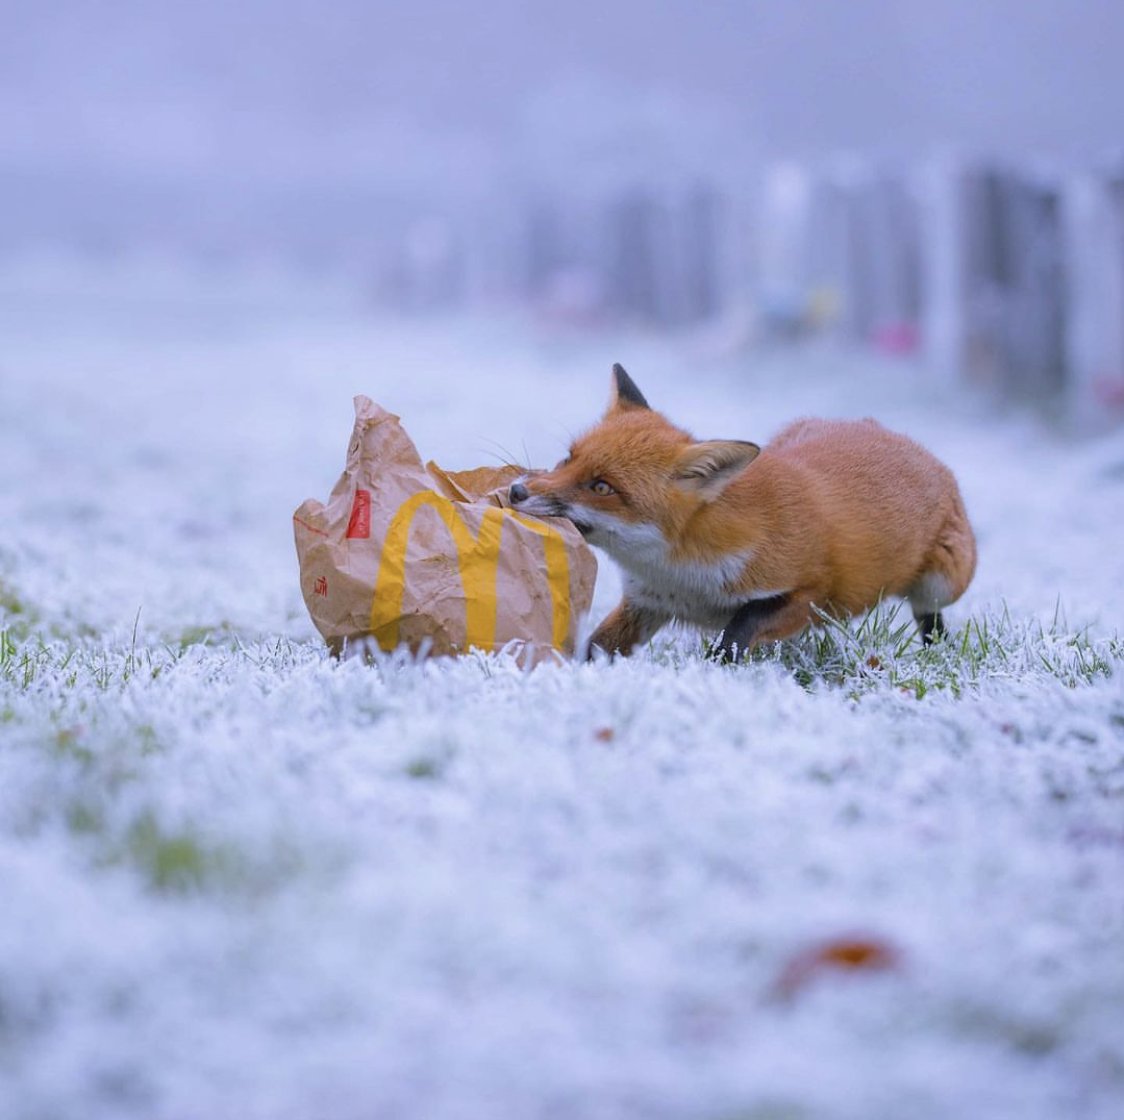 Top scavengers ! Thanks to @ashjames for sharing this #FoxOfTheDay